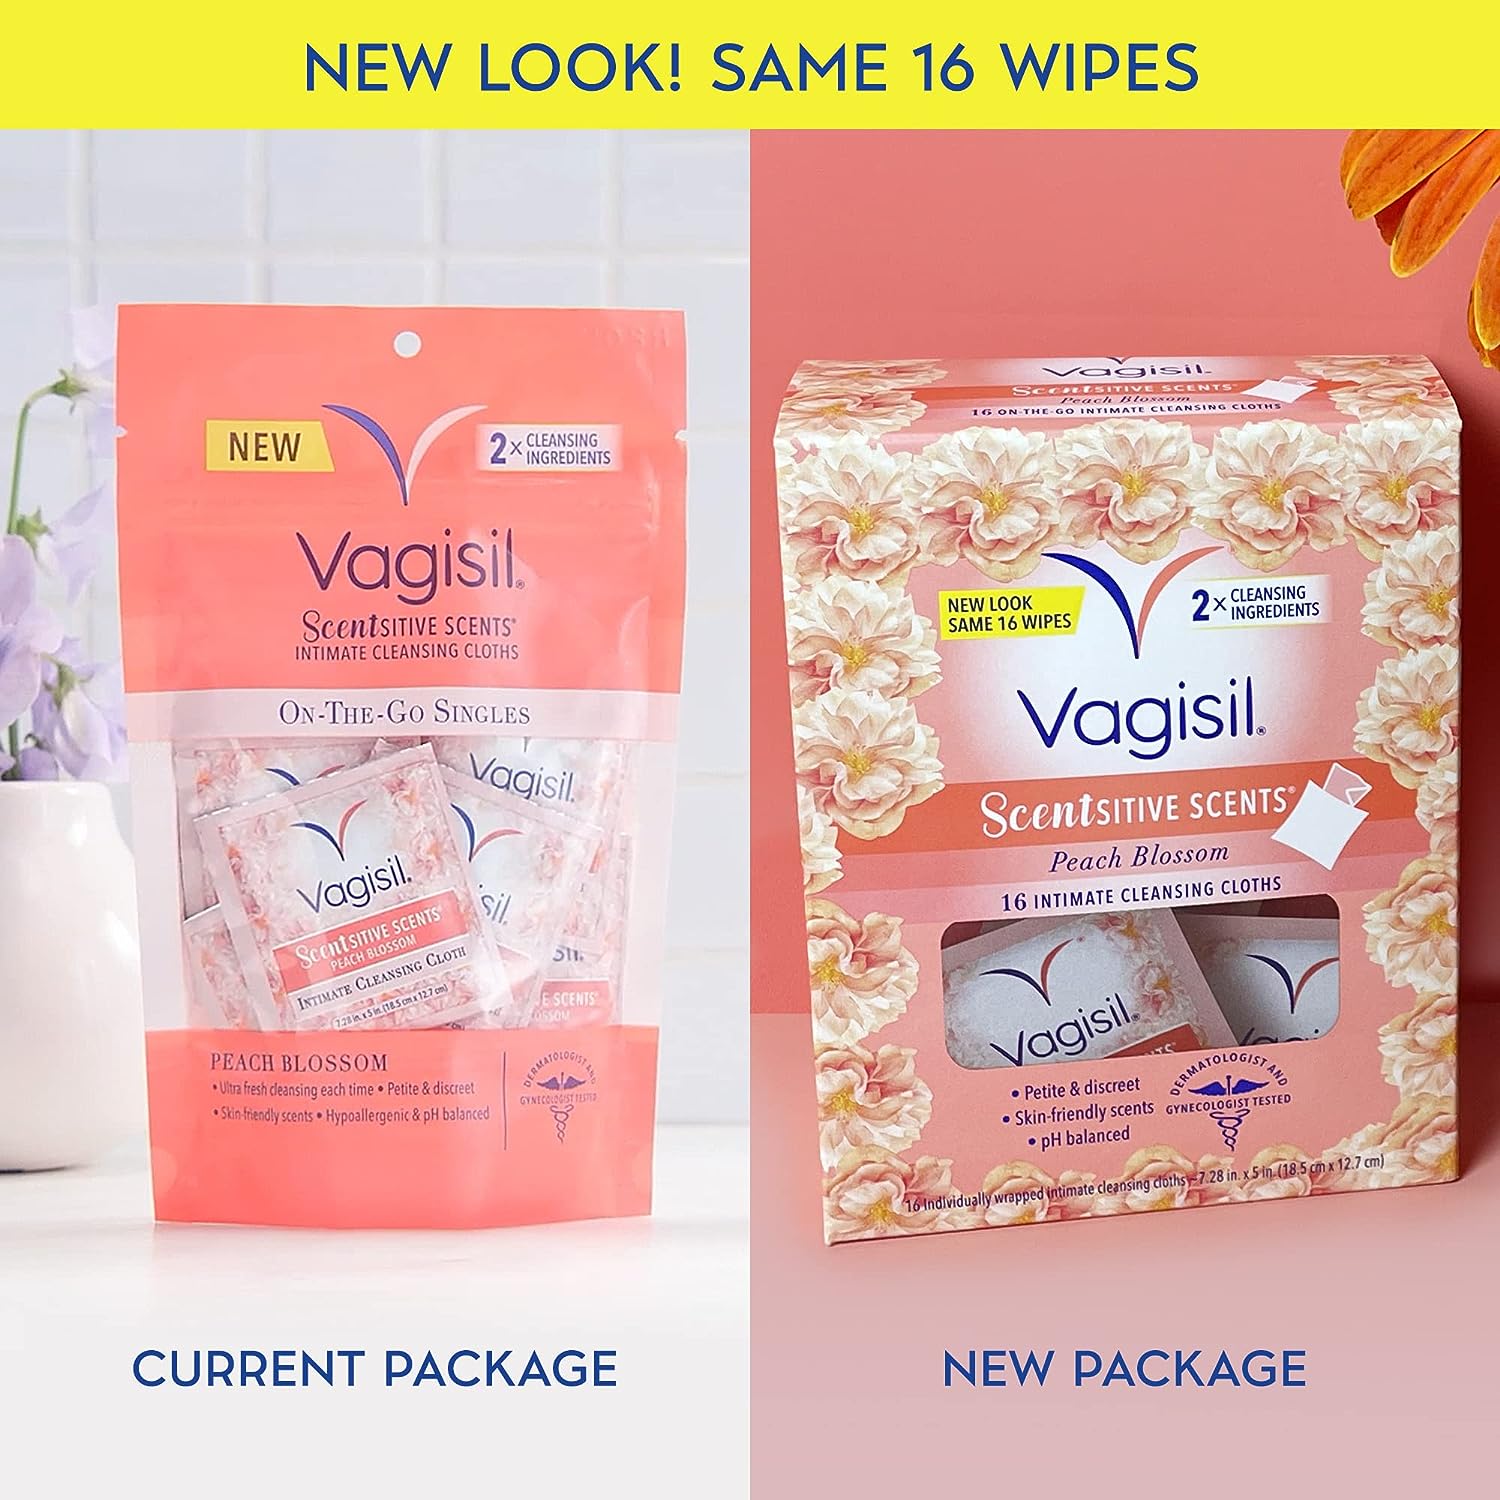 Vagisil Scentsitive Scents On-The-Go Feminine Cleansing Wipes Review